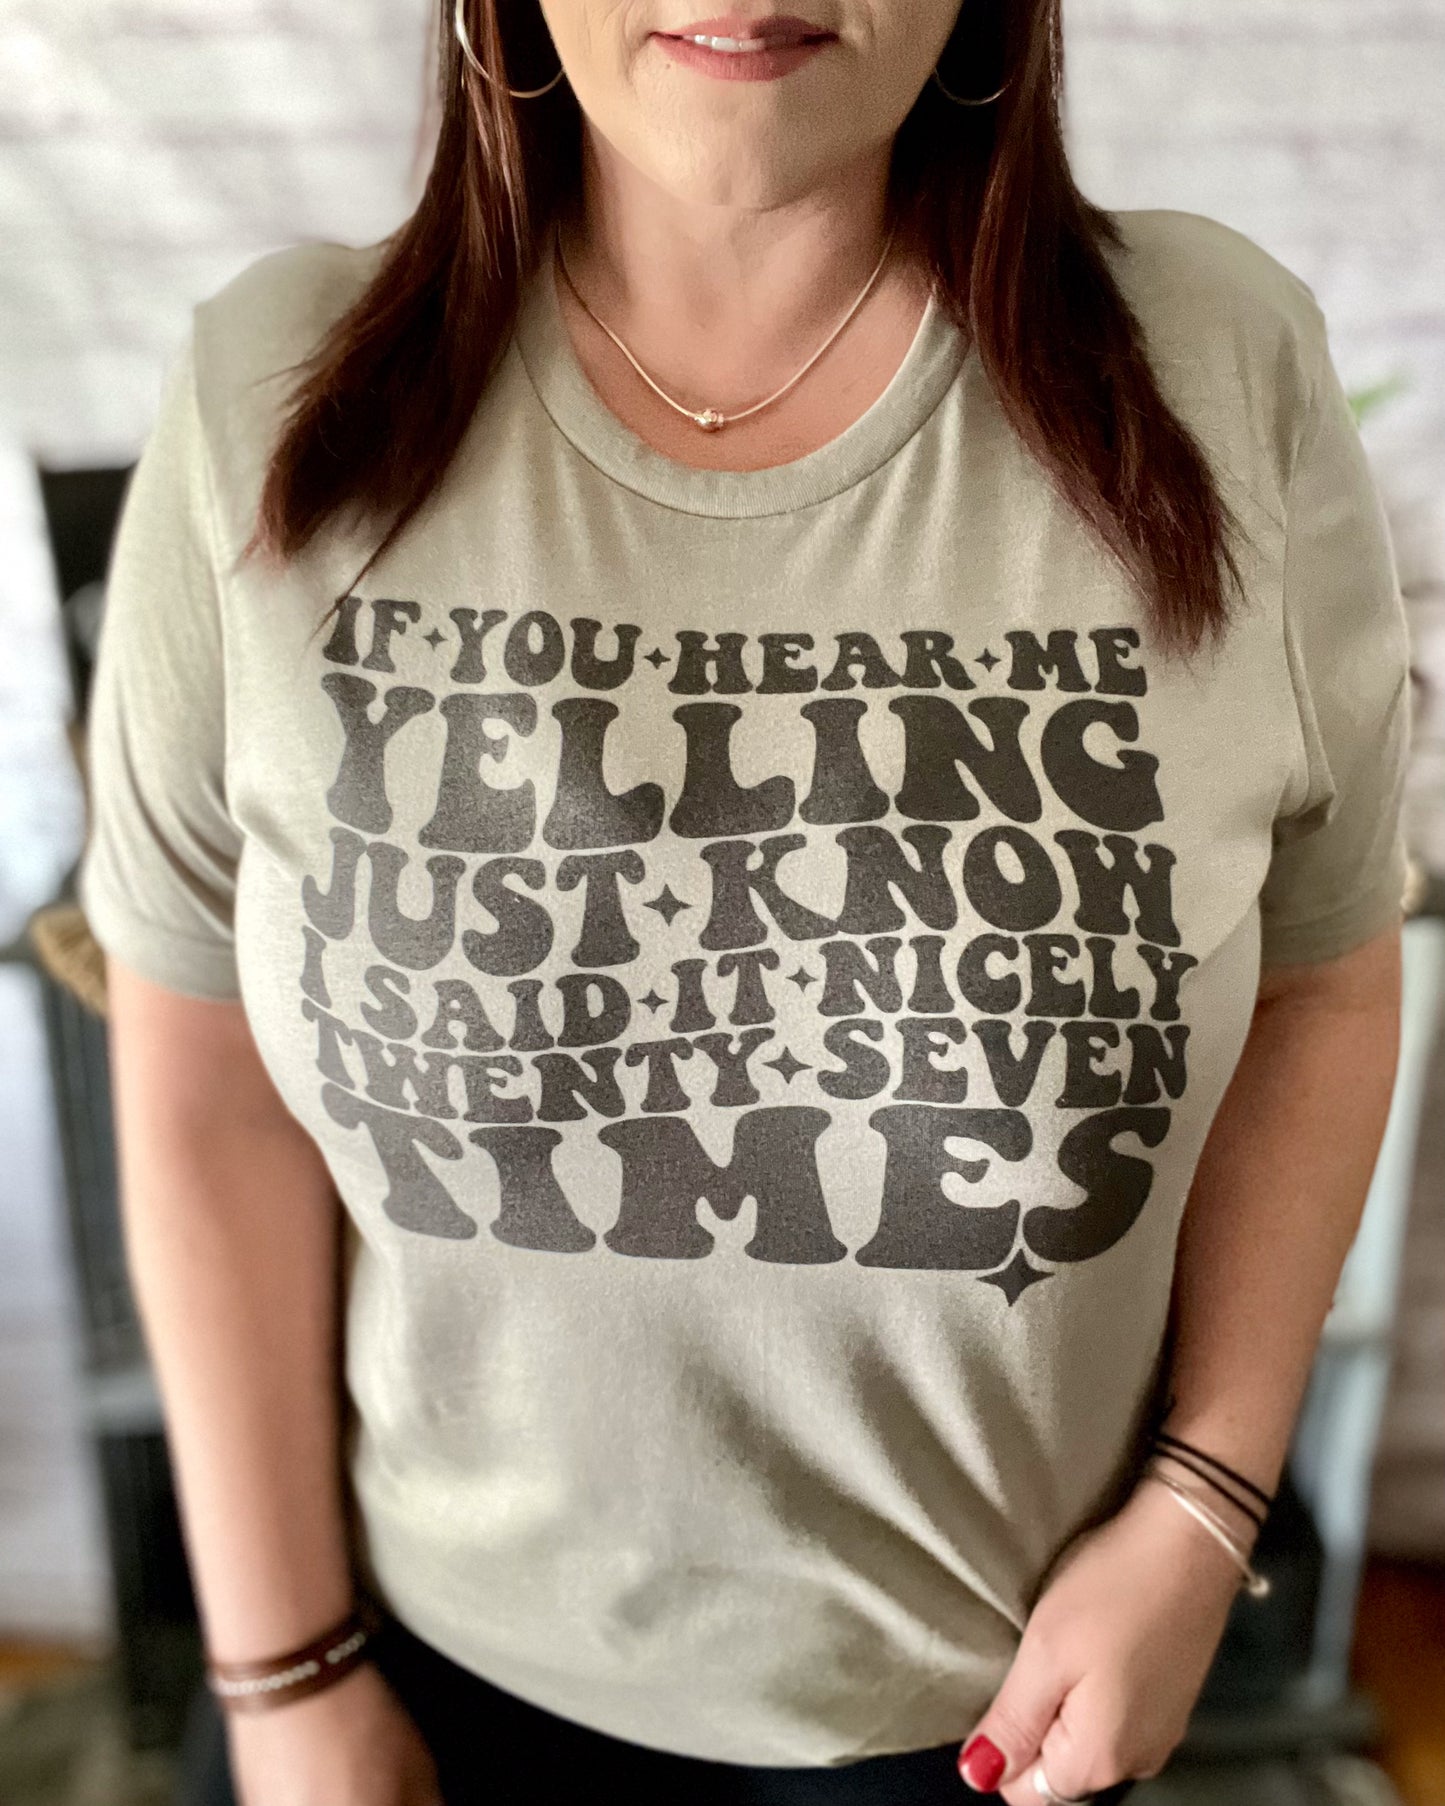 If You Hear Me Yelling Just Know I Said It Nicely Twenty Seven Times | T-Shirt